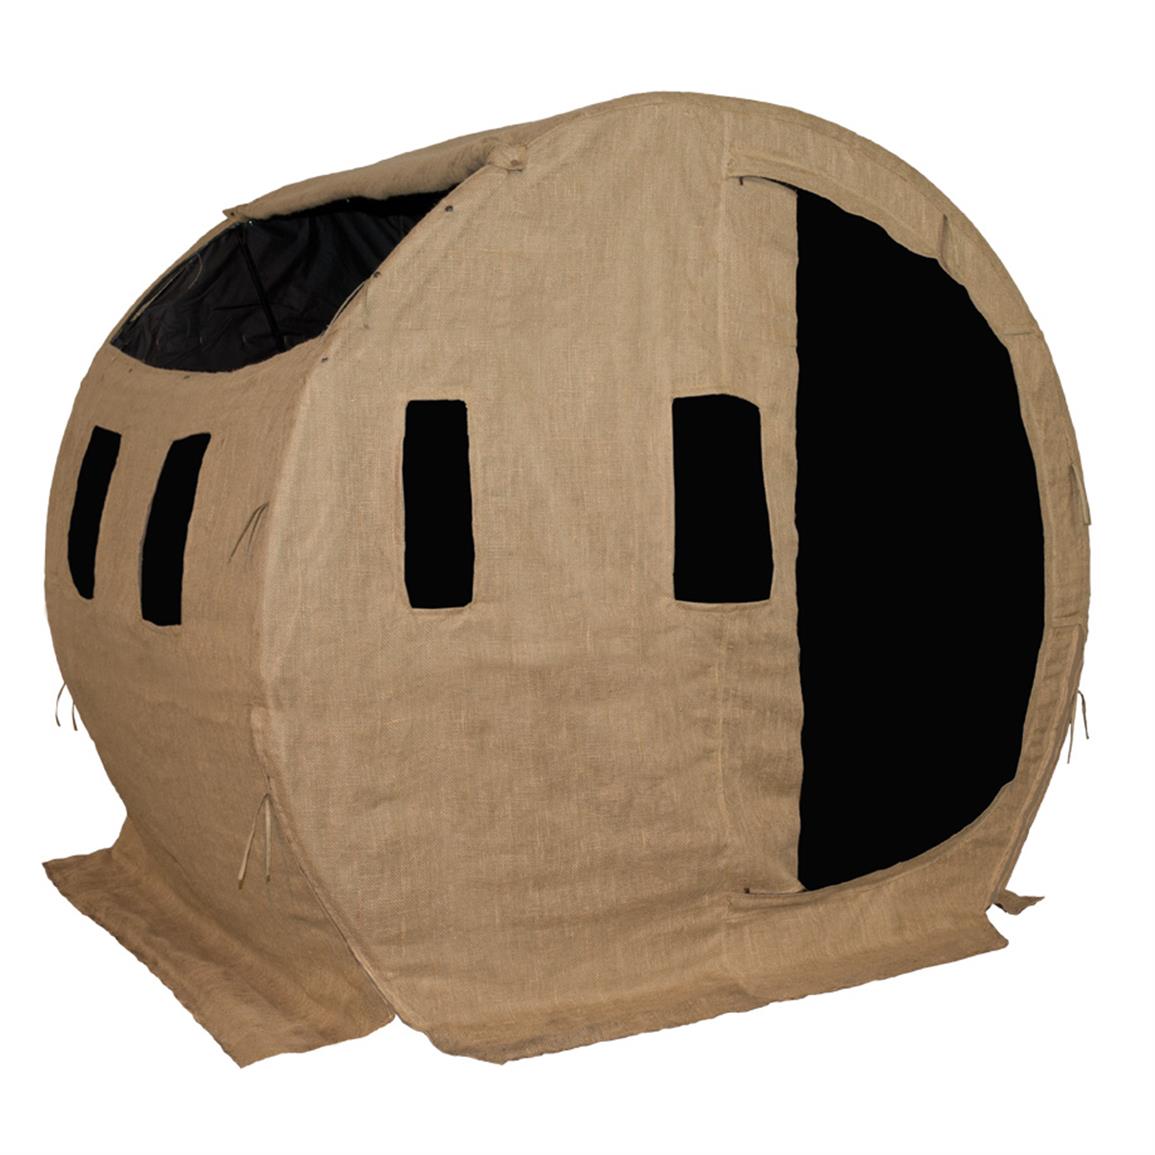 Muddy The Bale Blind Ground Blind 654203, Ground Blinds at Sportsman's Guide